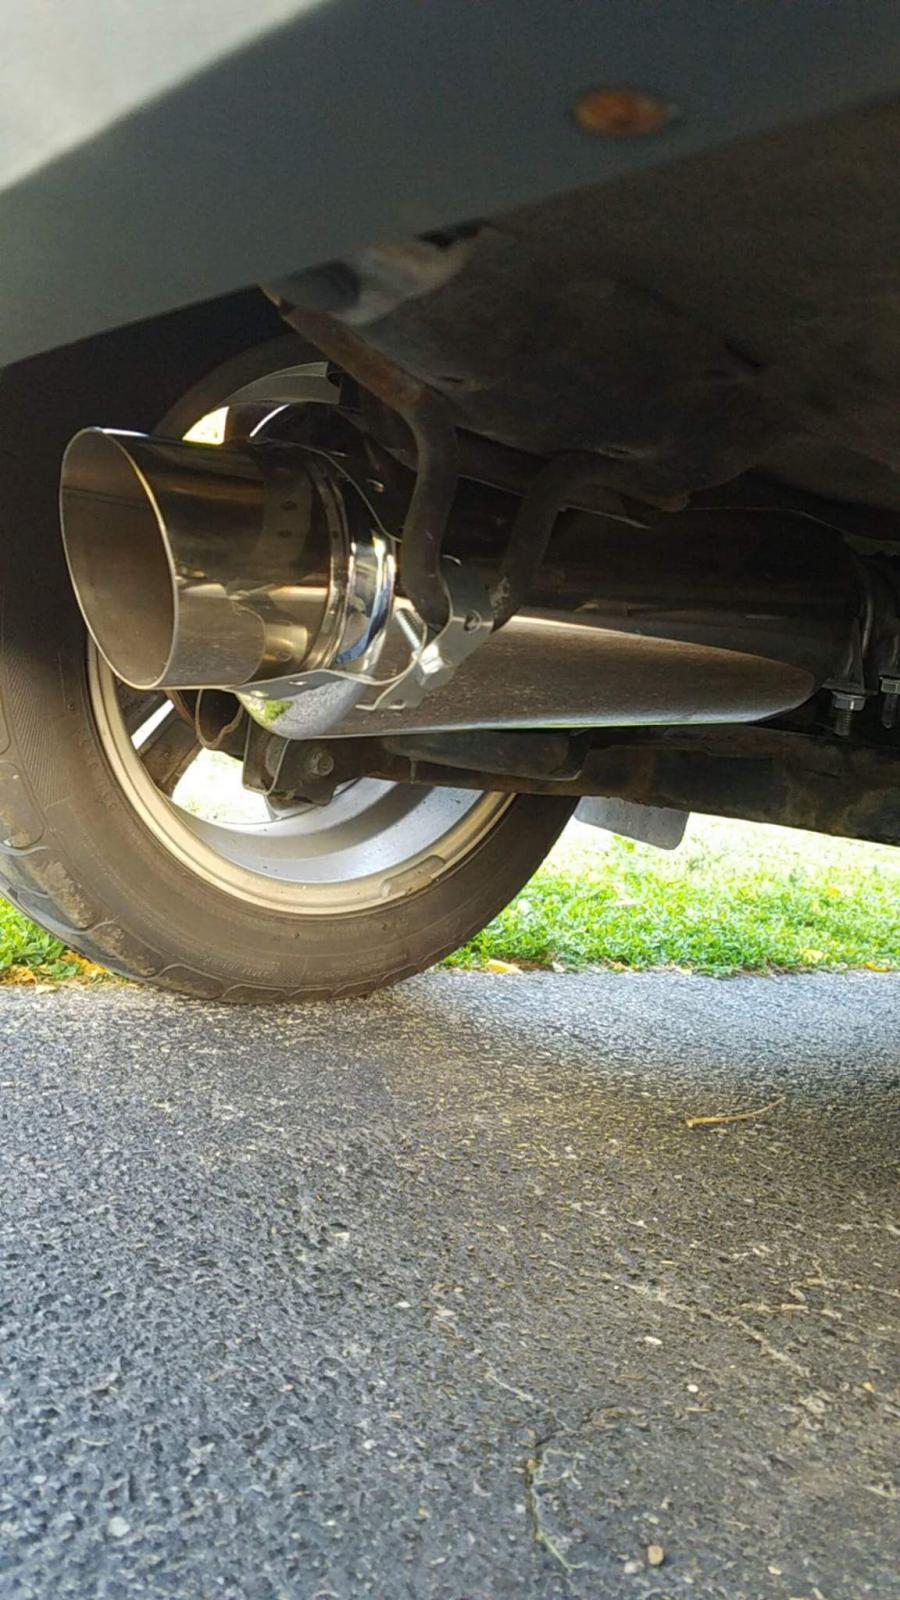 Exhaust - Accessories & Modifications - Chevy Spark Forum